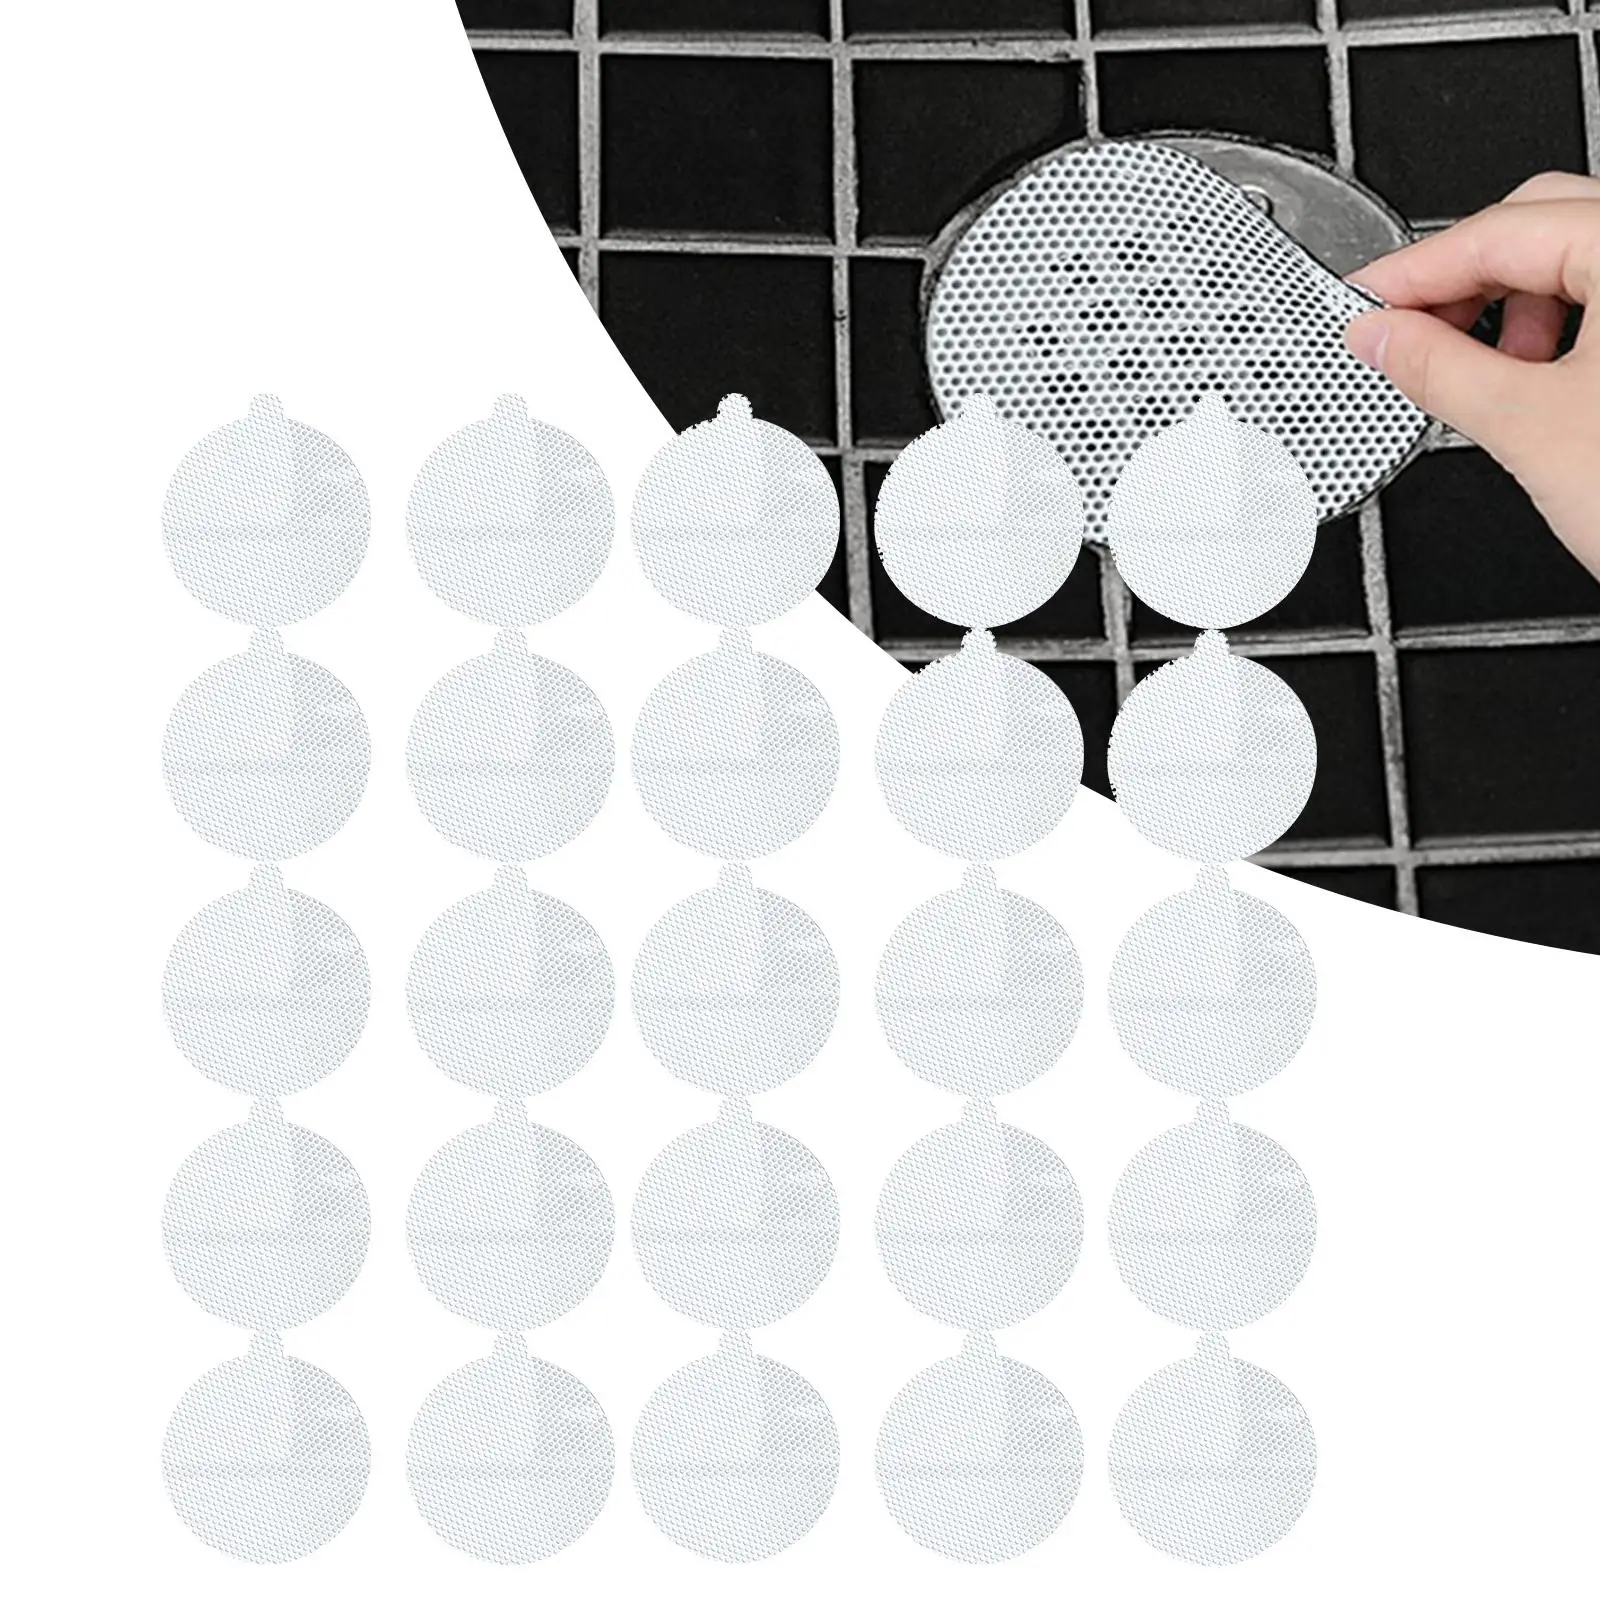 25x Round Disposable Shower Drain Catcher Collector Cover Strainers for Balcony Drain Hole Laundry Bathroom Kitchen Sink